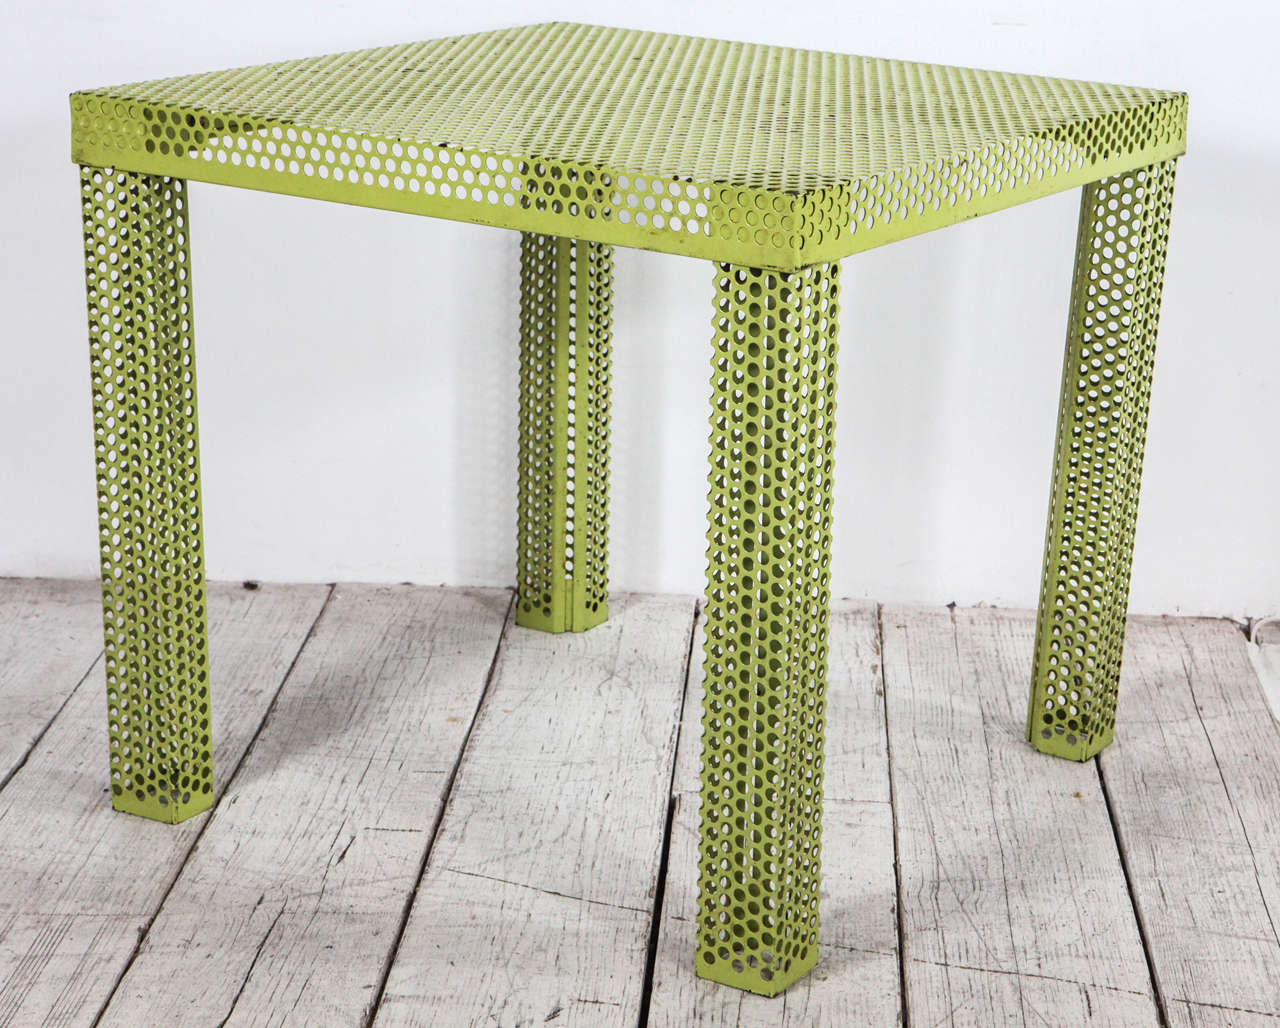 Modern large side table in great sour grass color.